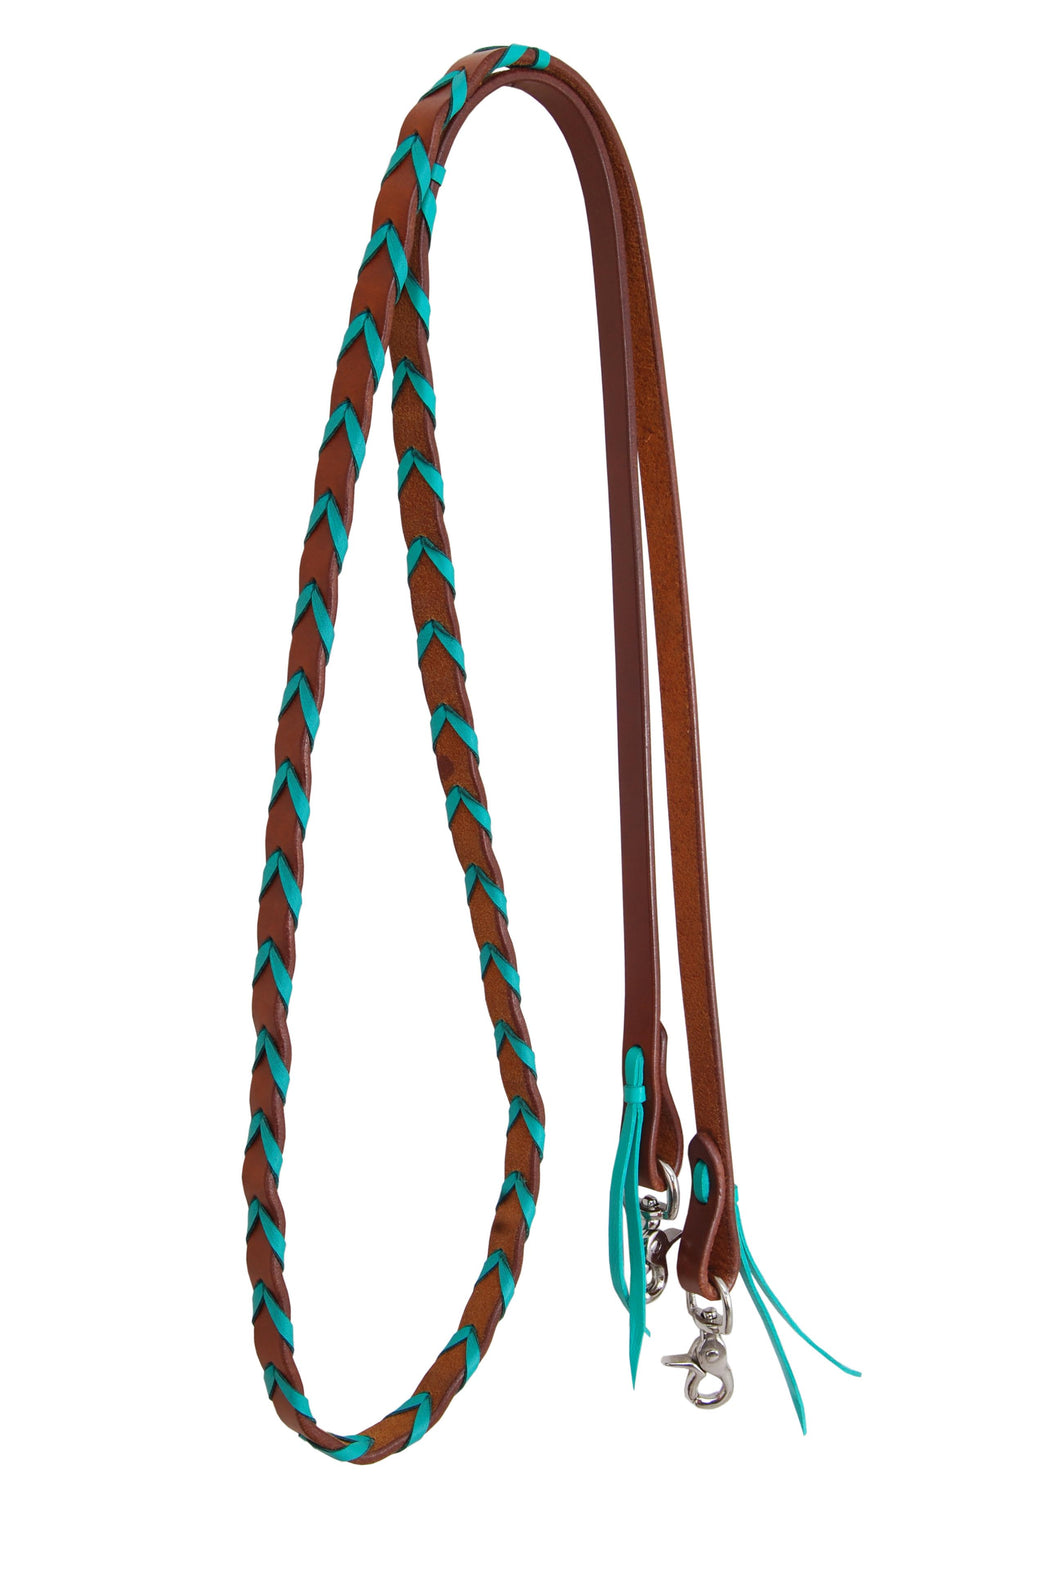 Rafter T Ranch Co. Leather Laced Barrel Reins